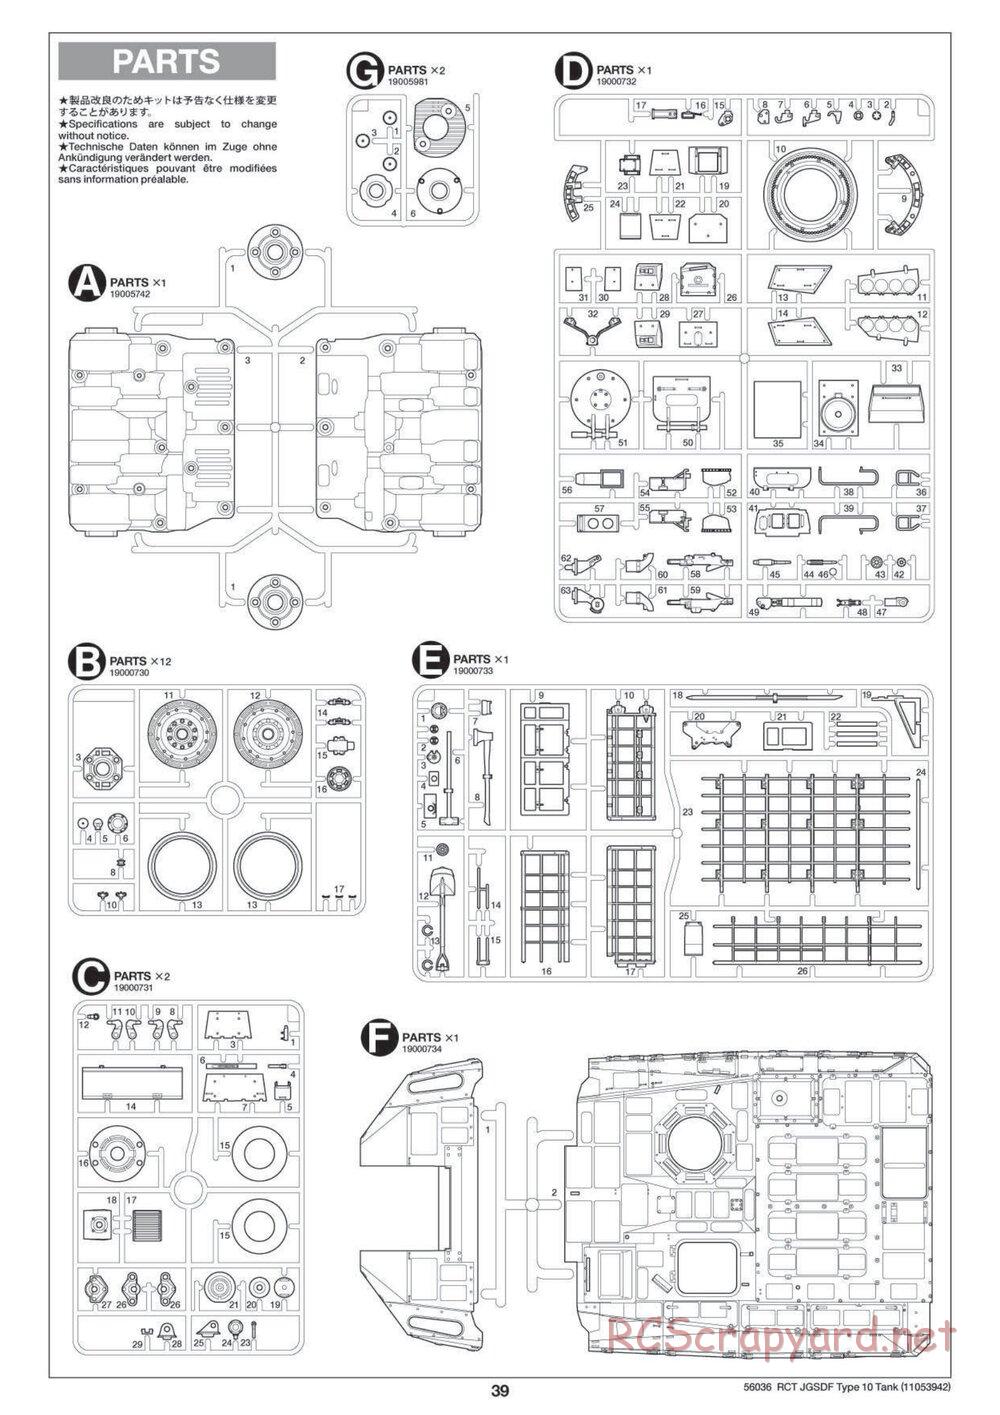 Tamiya - JGSDF Type 10 Tank - 1/16 Scale Chassis - Manual - Page 39